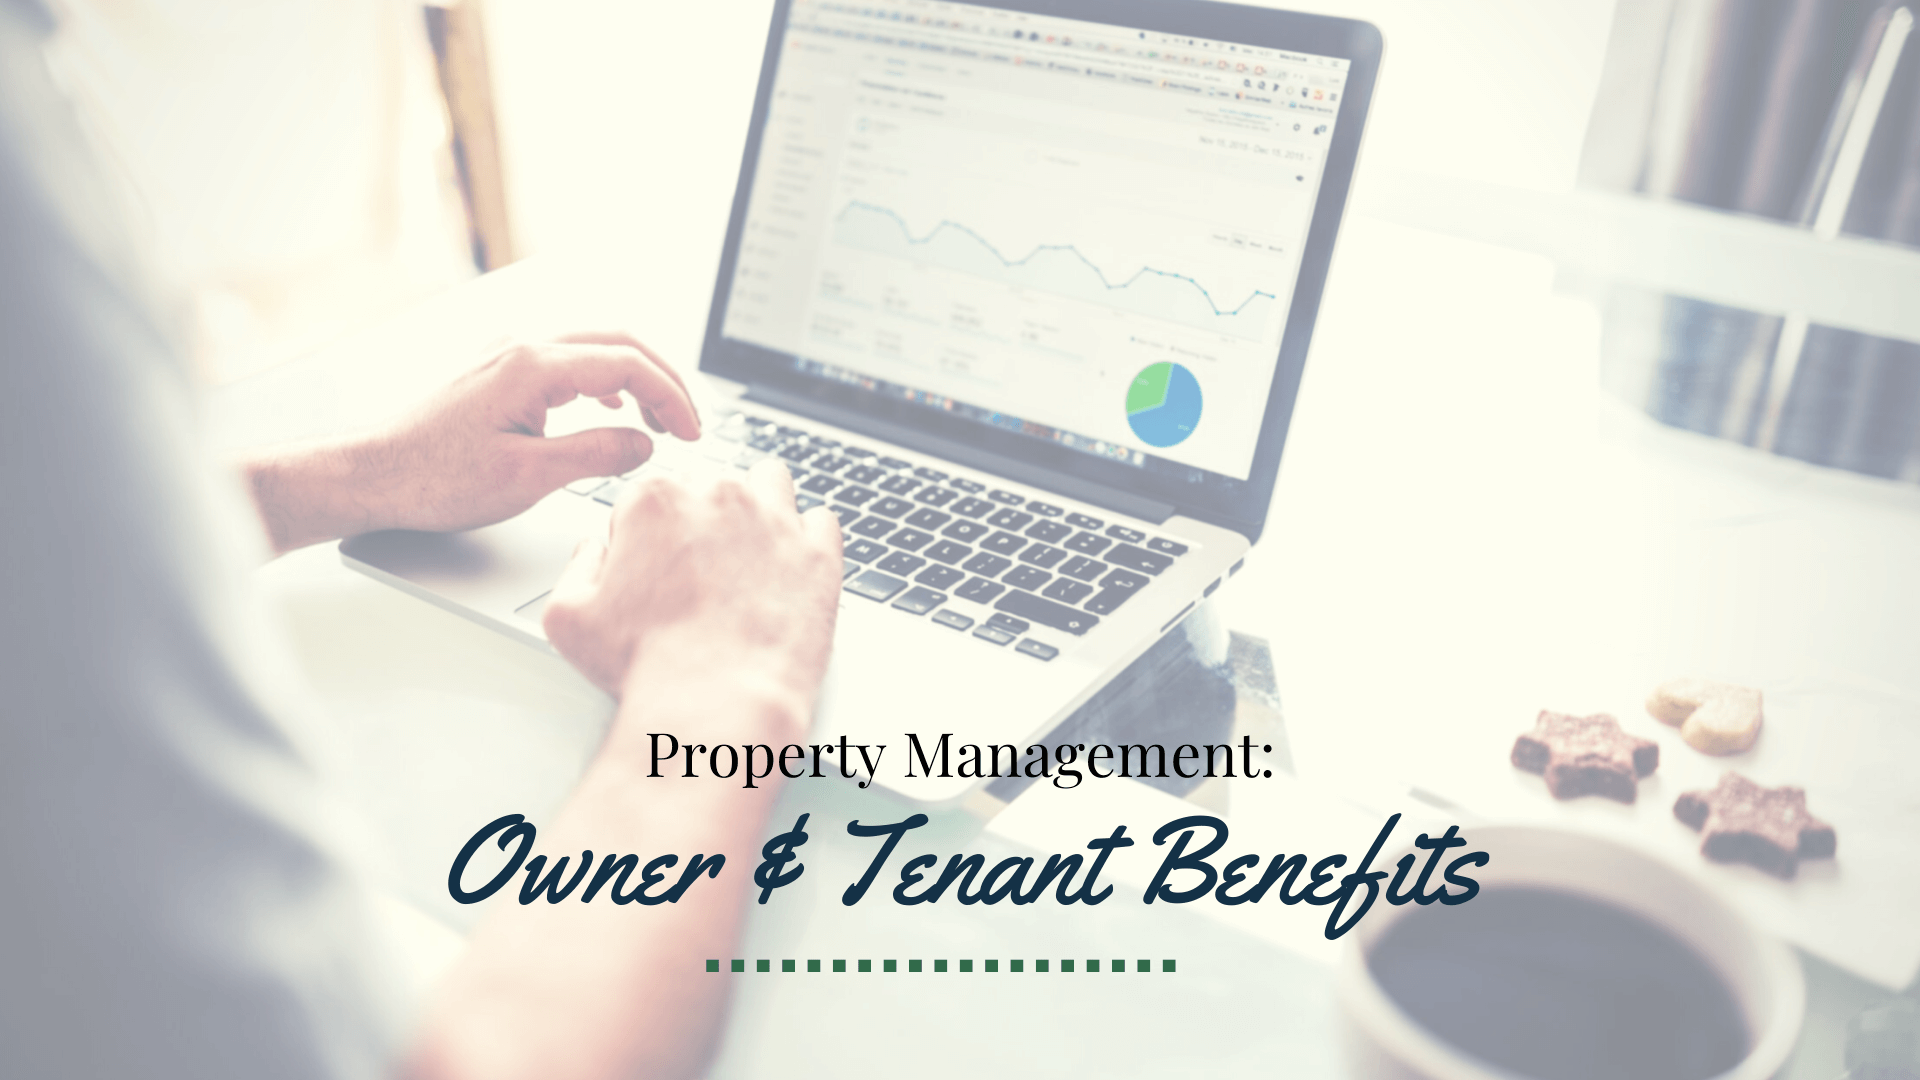 How a Virtual Golden, CO Property Management Company Benefits Owners and Tenants